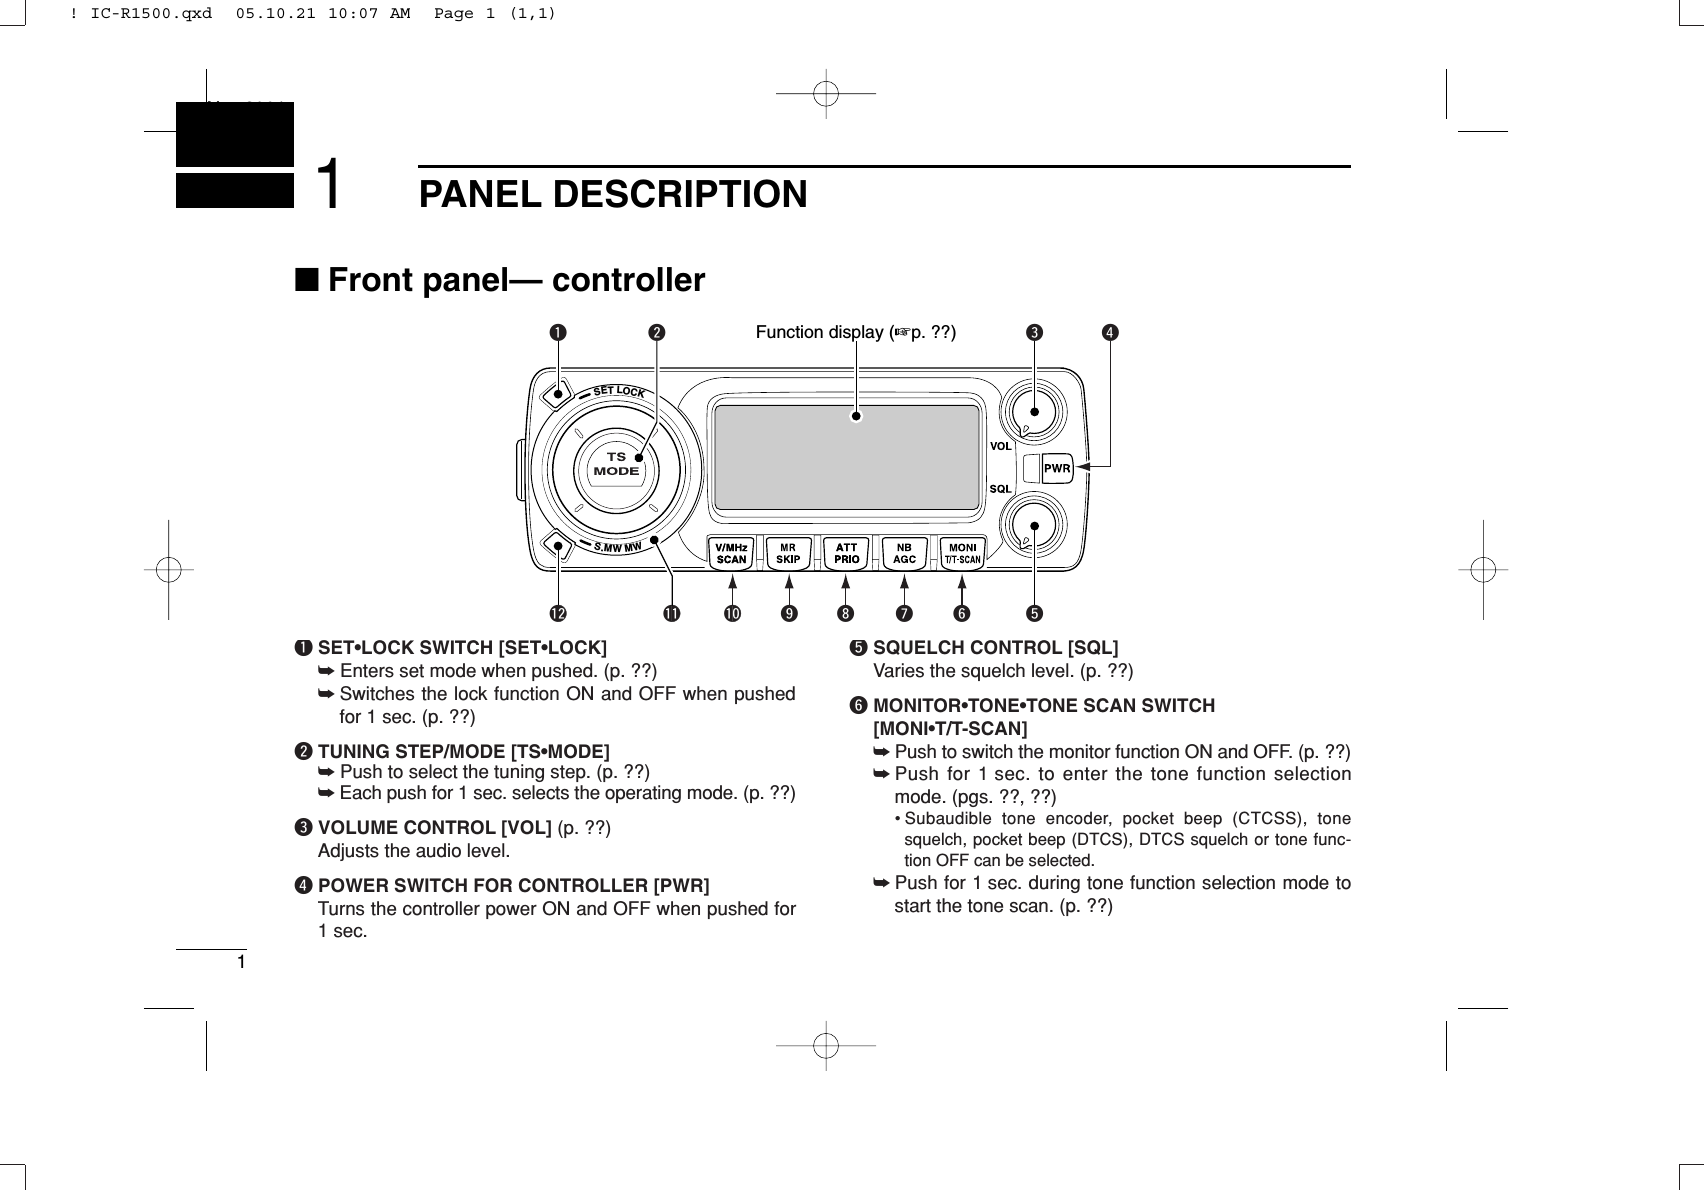 1PANEL DESCRIPTIONNew20011■Front panel— controllerqSET•LOCK SWITCH [SET•LOCK]➥Enters set mode when pushed. (p. ??)➥Switches the lock function ON and OFF when pushedfor 1 sec. (p. ??)wTUNING STEP/MODE [TS•MODE]➥Push to select the tuning step. (p. ??)➥Each push for 1 sec. selects the operating mode. (p. ??)eVOLUME CONTROL [VOL] (p. ??)Adjusts the audio level.rPOWER SWITCH FOR CONTROLLER [PWR]Turns the controller power ON and OFF when pushed for1 sec.tSQUELCH CONTROL [SQL]Varies the squelch level. (p. ??)yMONITOR•TONE•TONE SCAN SWITCH[MONI•T/T-SCAN]➥Push to switch the monitor function ON and OFF. (p. ??)➥Push for 1 sec. to enter the tone function selectionmode. (pgs. ??, ??)• Subaudible tone encoder, pocket beep (CTCSS), tonesquelch, pocket beep (DTCS), DTCS squelch or tone func-tion OFF can be selected.➥Push for 1 sec. during tone function selection mode tostart the tone scan. (p. ??)SETLOCKS.MWMWrewq!2 !1 !0 oi uy tFunction display (☞p. ??)! IC-R1500.qxd  05.10.21 10:07 AM  Page 1 (1,1)